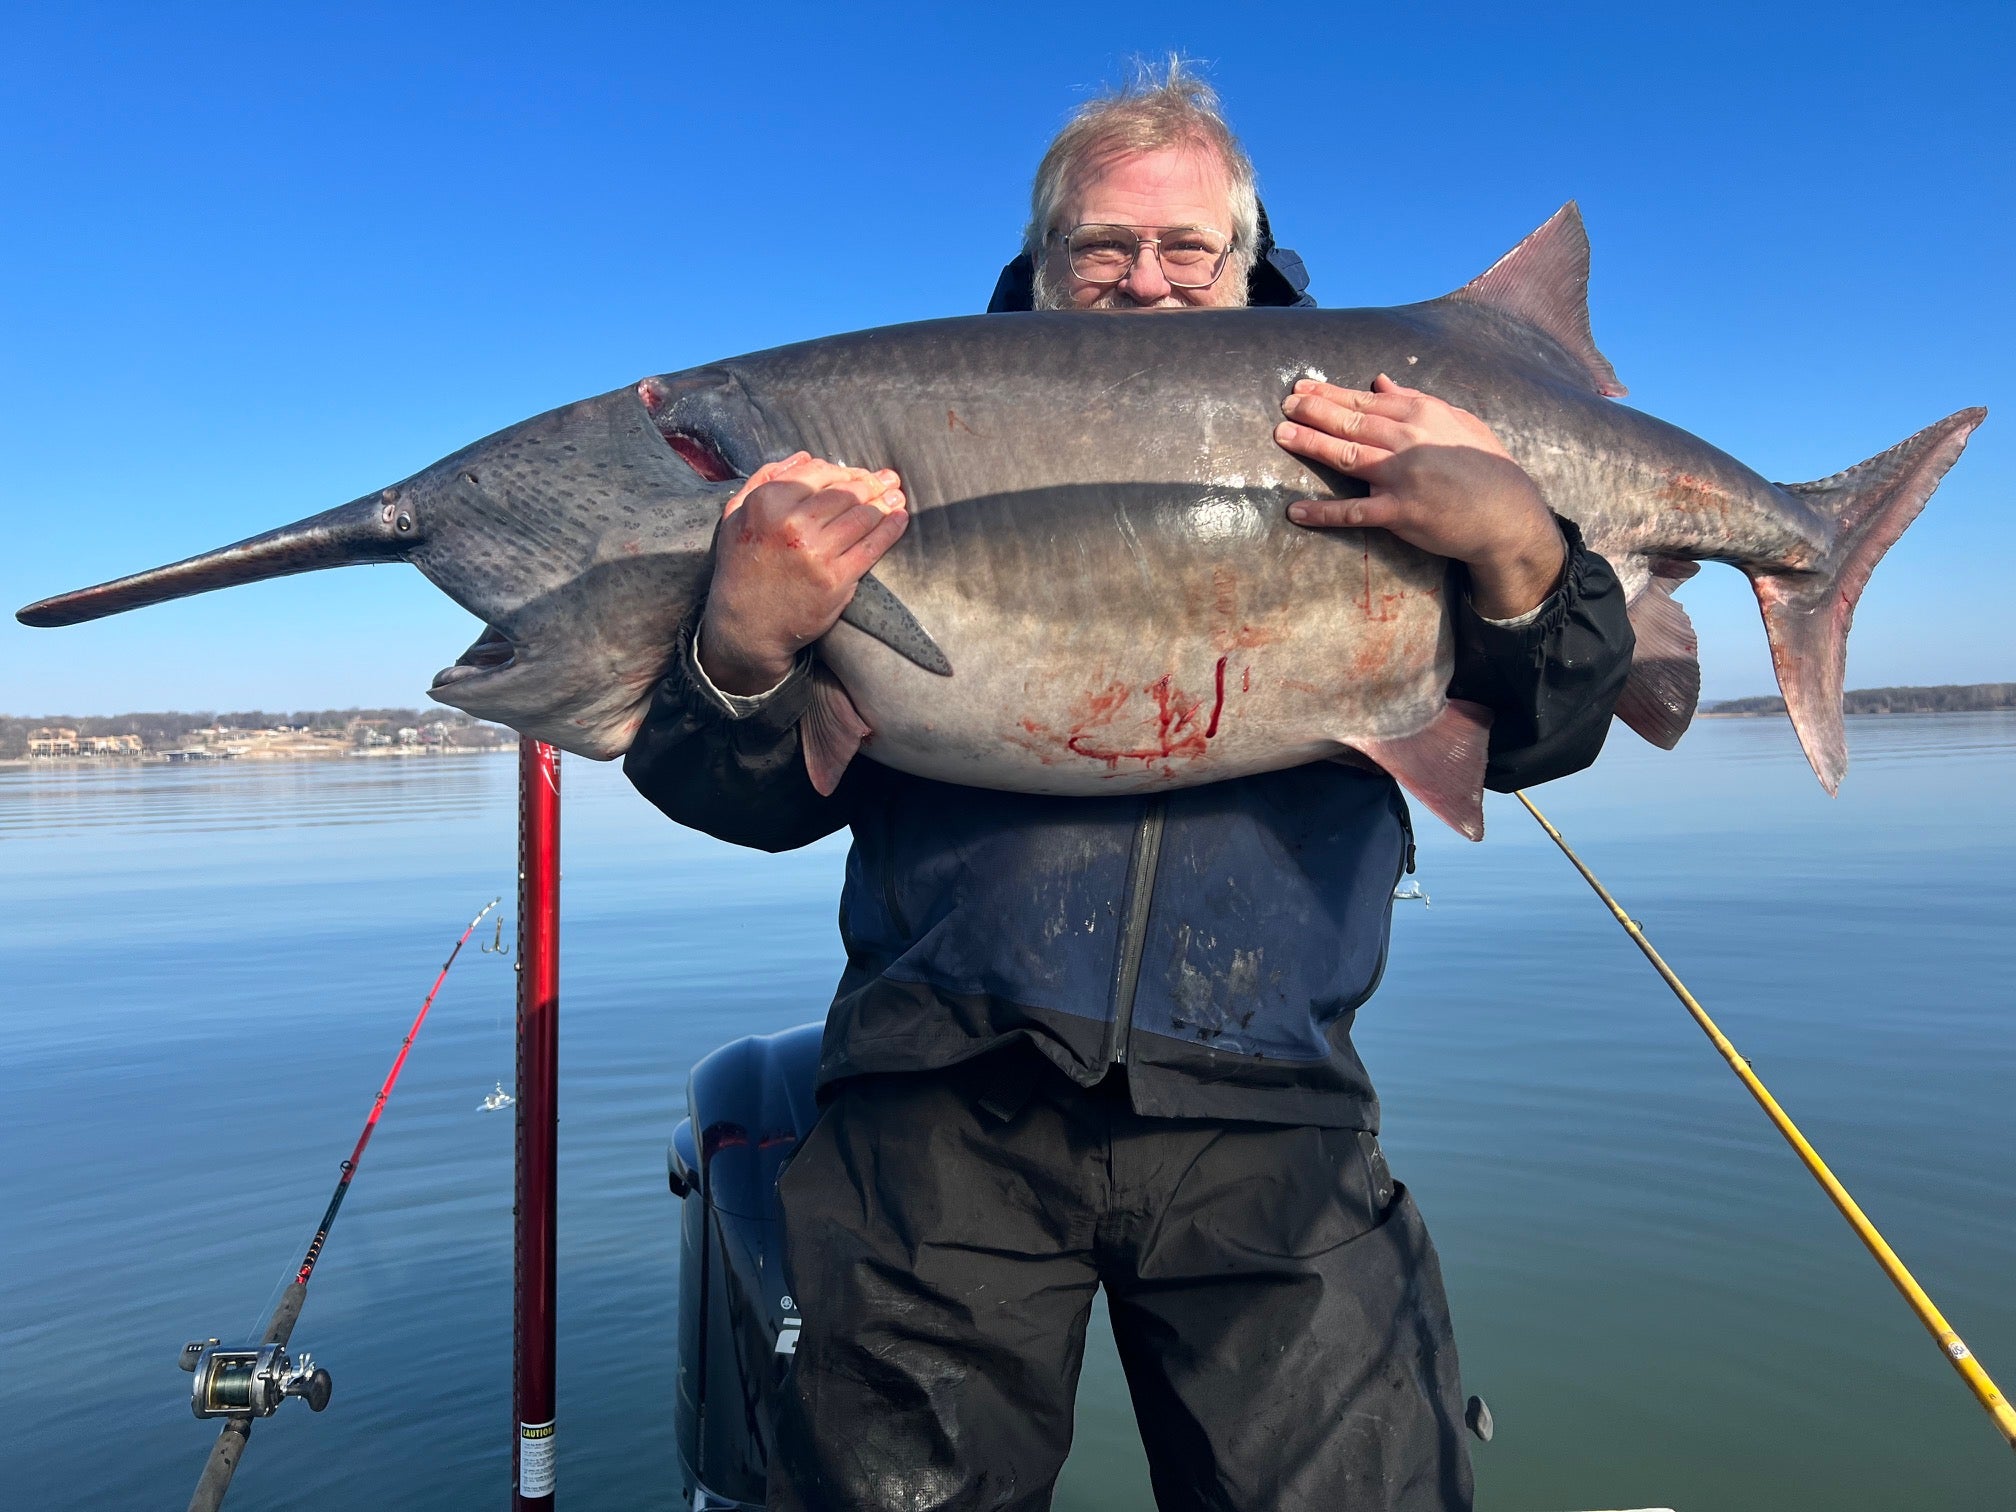 First-Time Angler Takes a Giant Paddlefish | Field & Stream